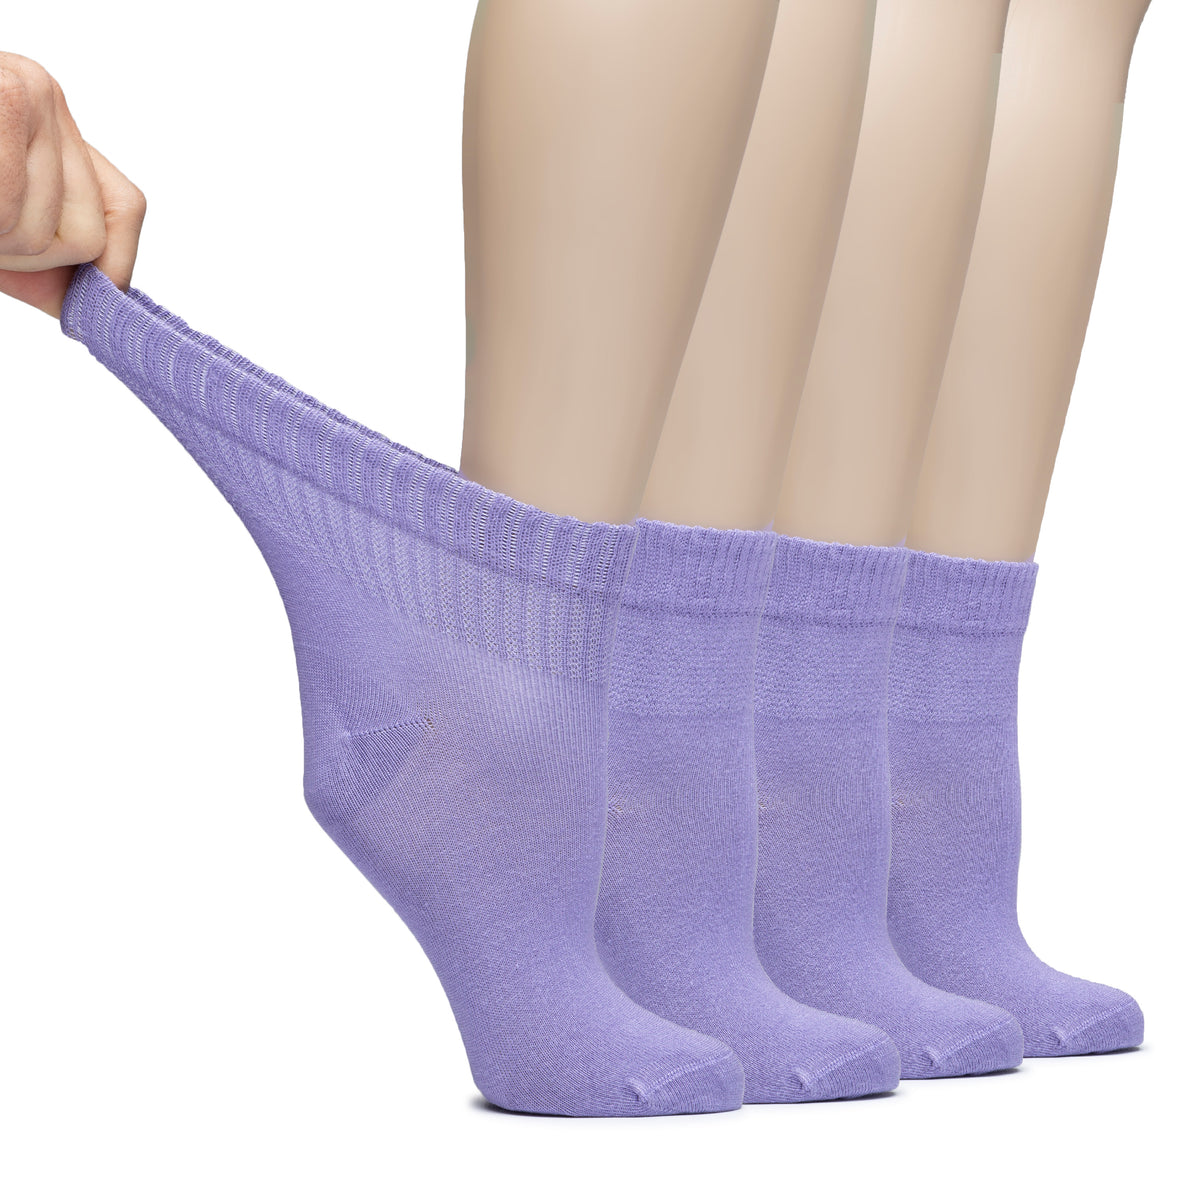 These are Diabetic Bamboo Ankle Socks in purple, worn by a woman's feet. The socks are designed to provide comfort and support for those with diabetes.